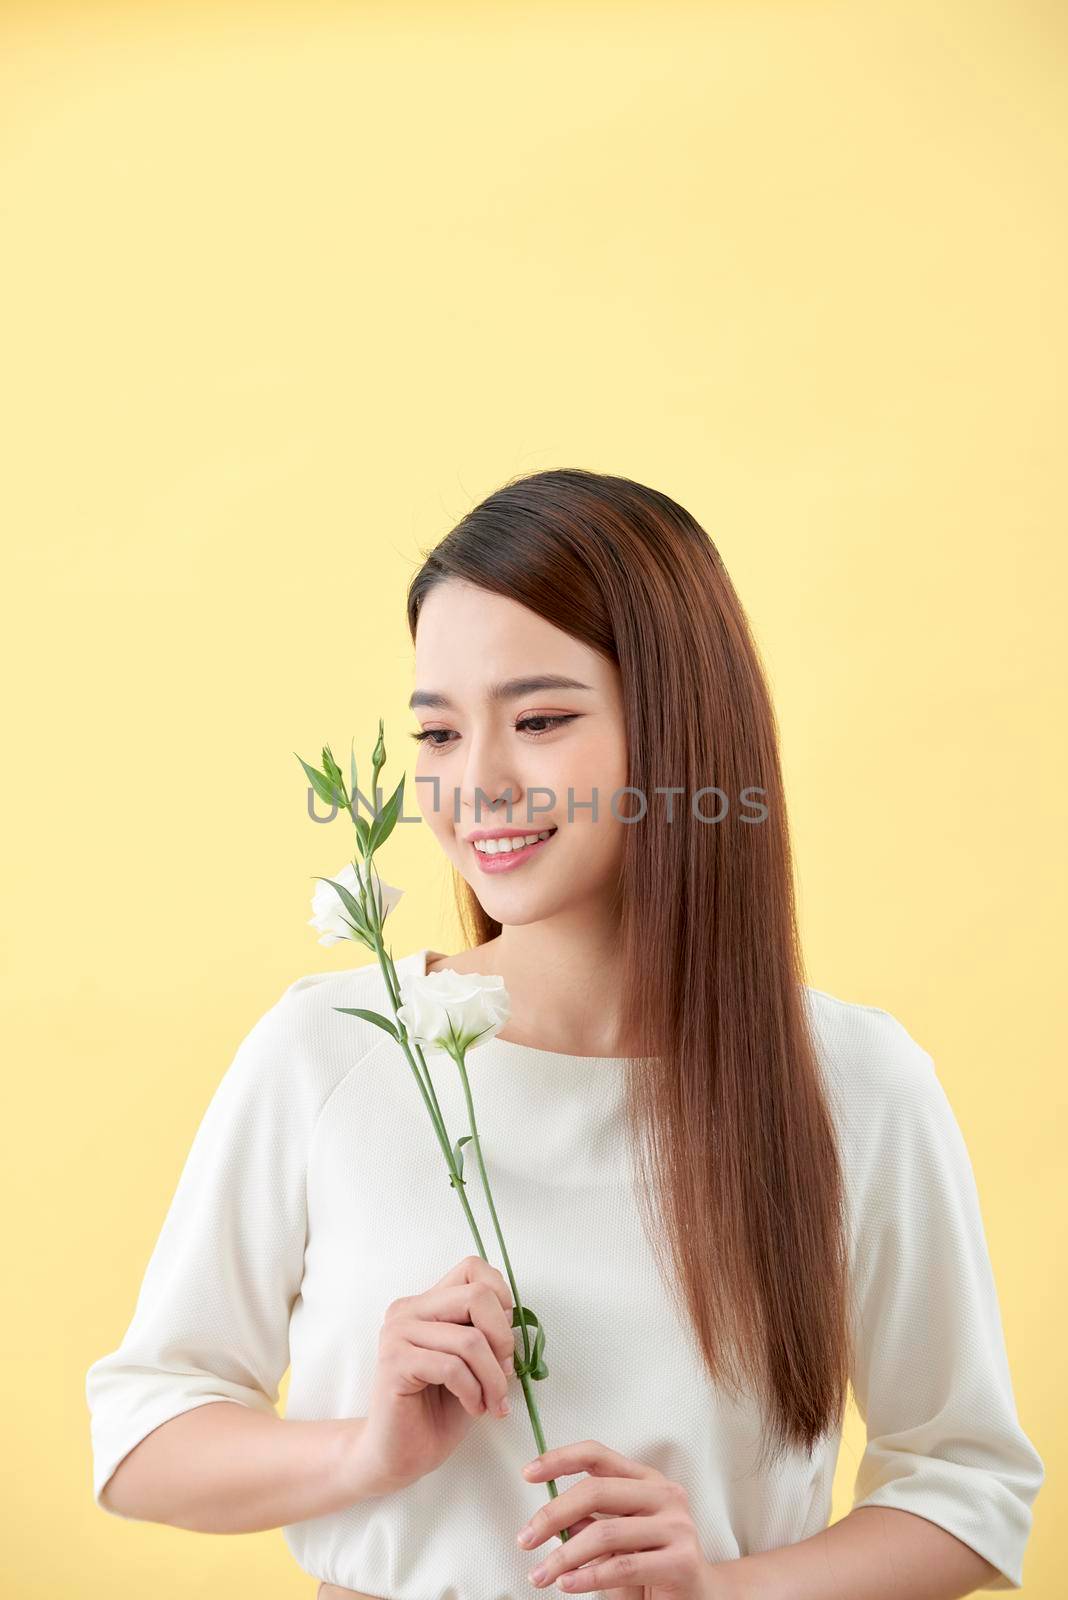 Beauty portrait of lady 20s holding white lisianthus flowers over yellow background by makidotvn